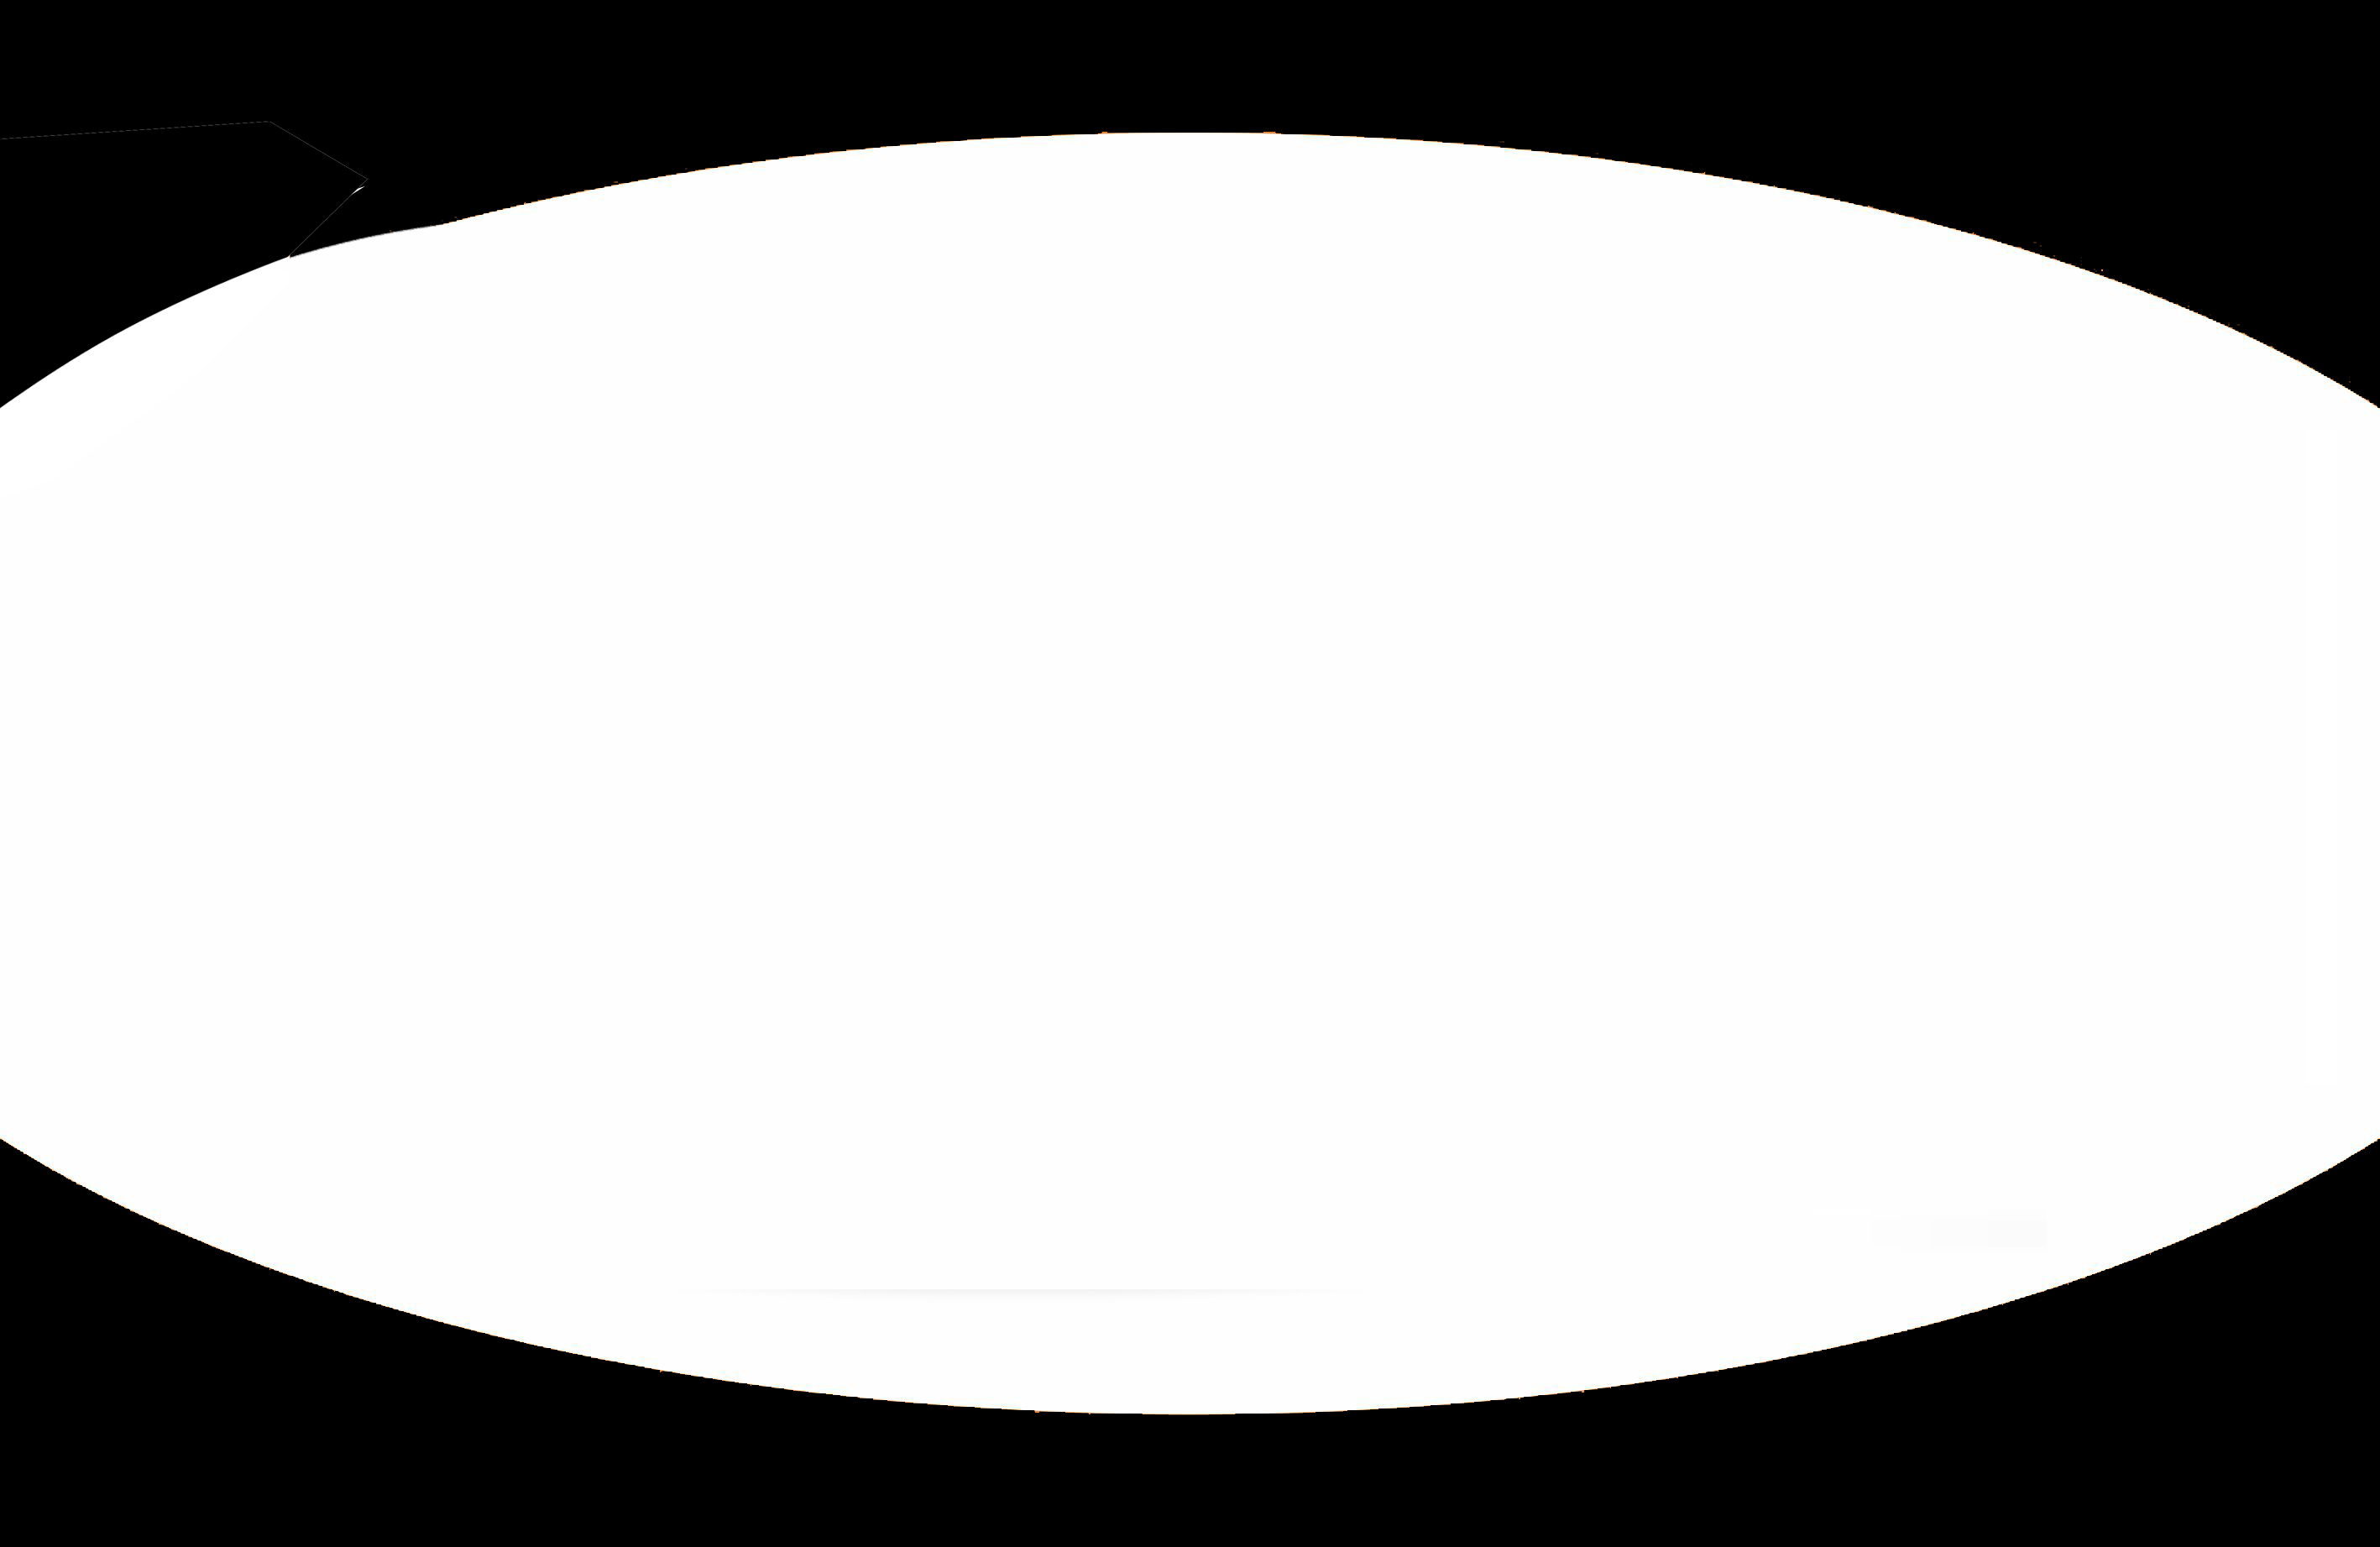 css - How to give a div oval shape? - Stack Overflow